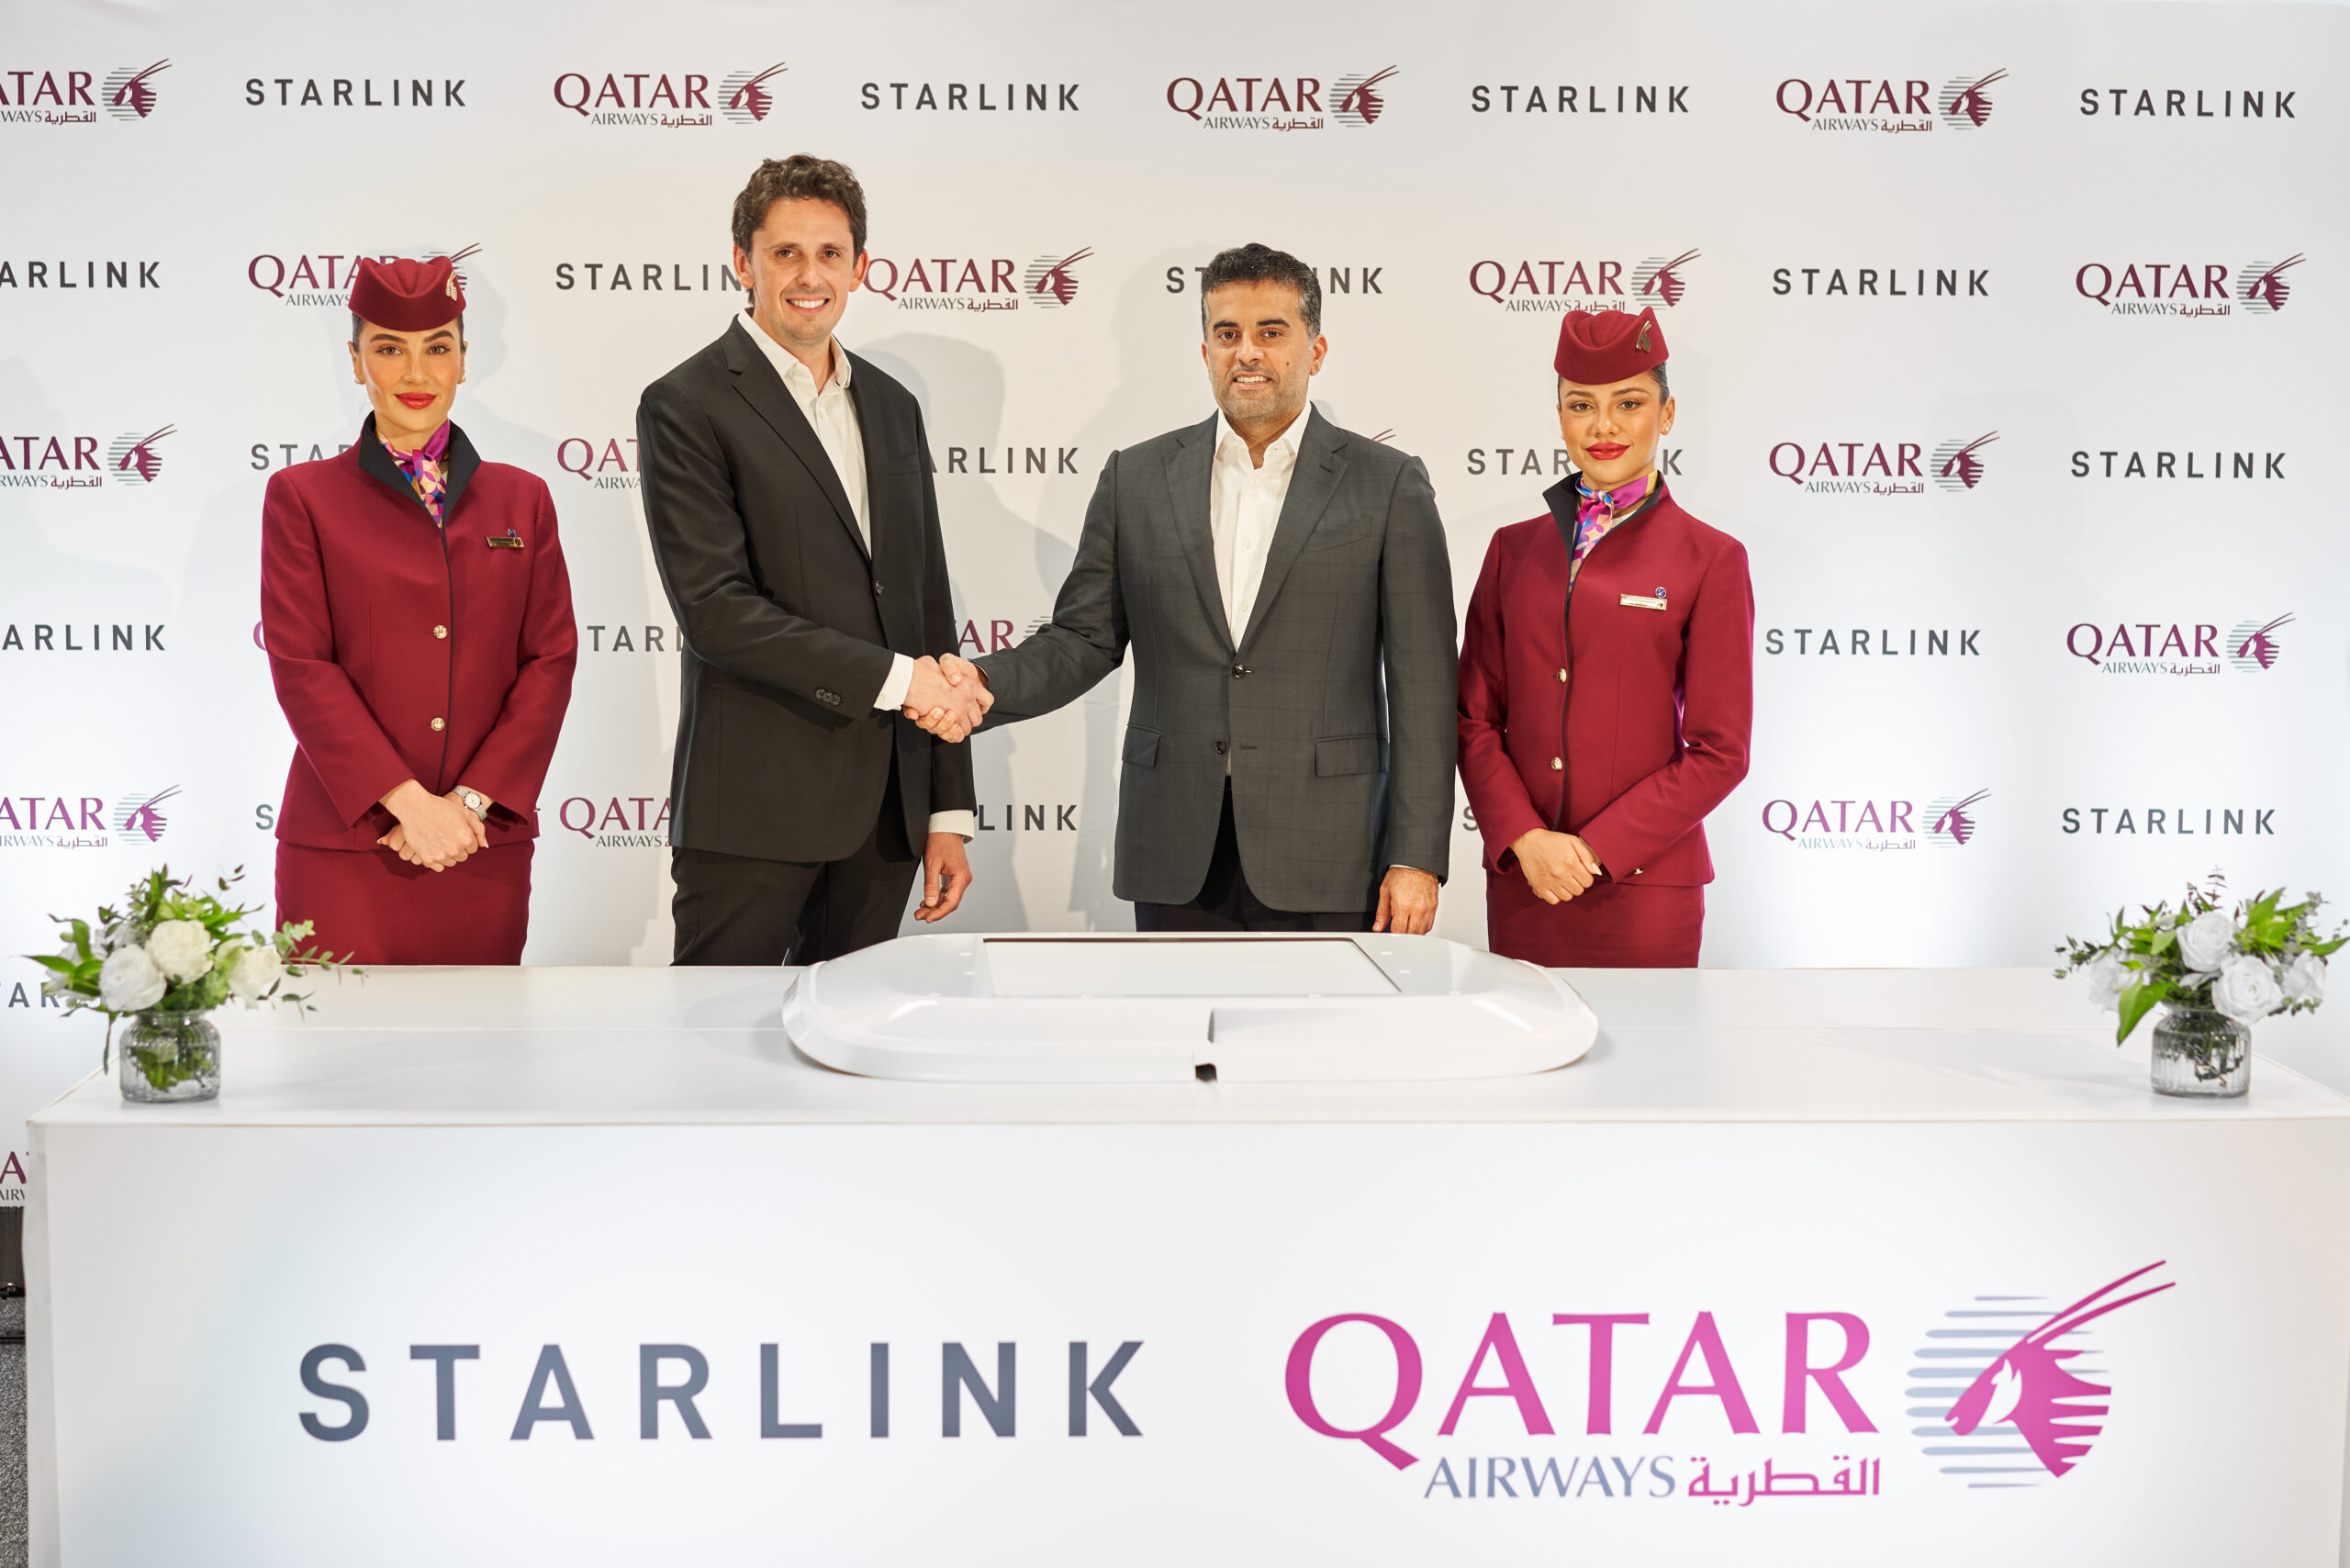 Qatar Airways to emerge as first MENA airline to introduce complimentary Starlink Wi-Fi